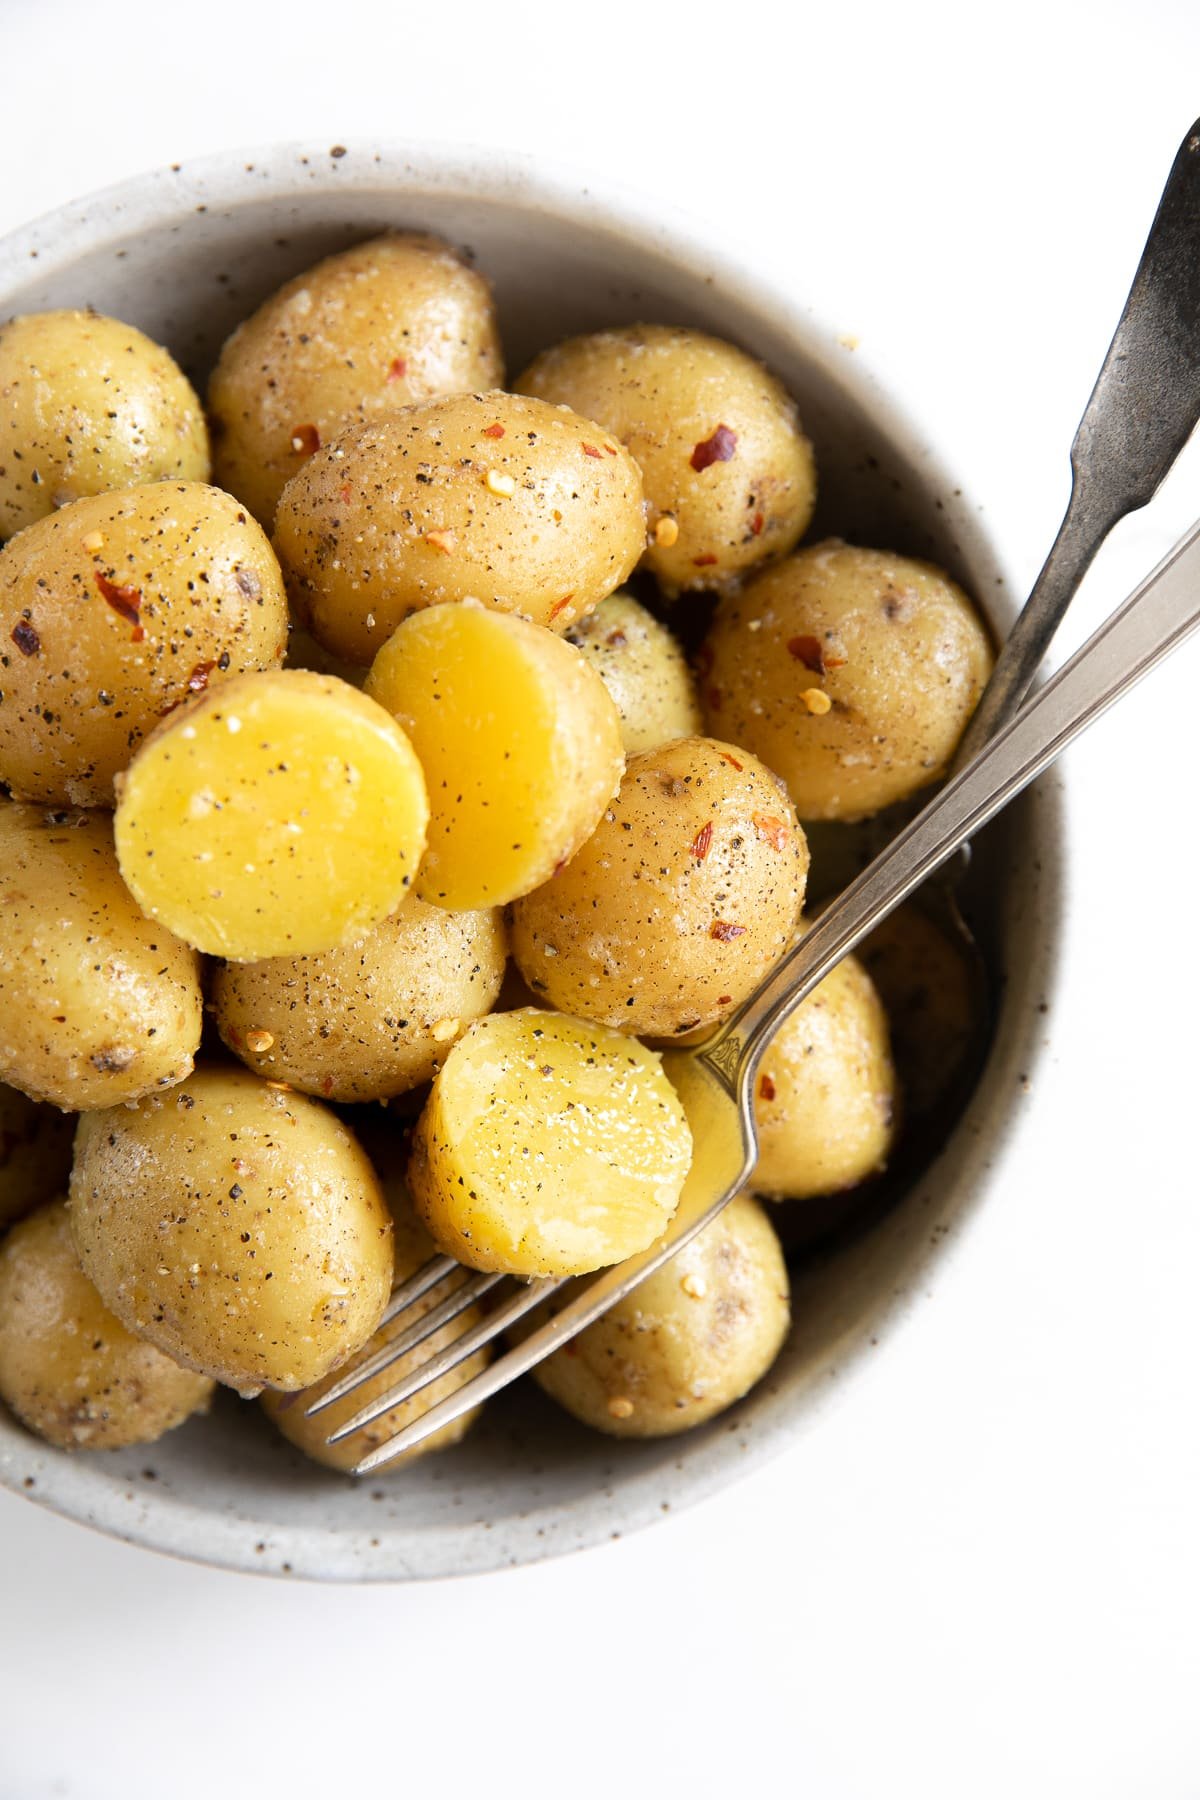 Round serving bowl filled with small yellow boiled potatoes.